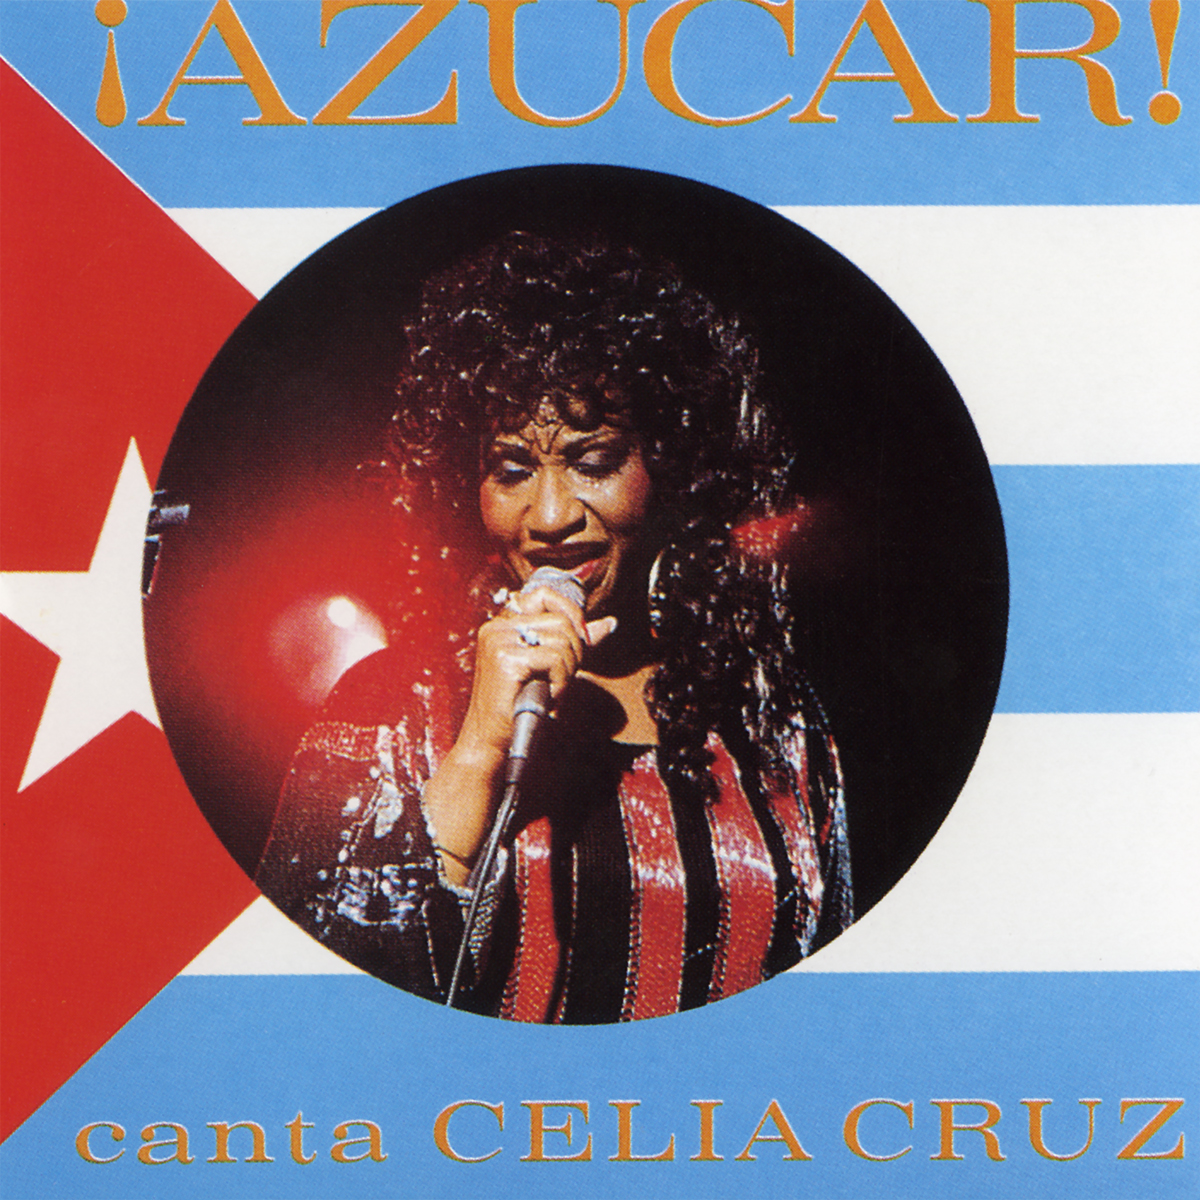 Featured Image for “AZUCAR”